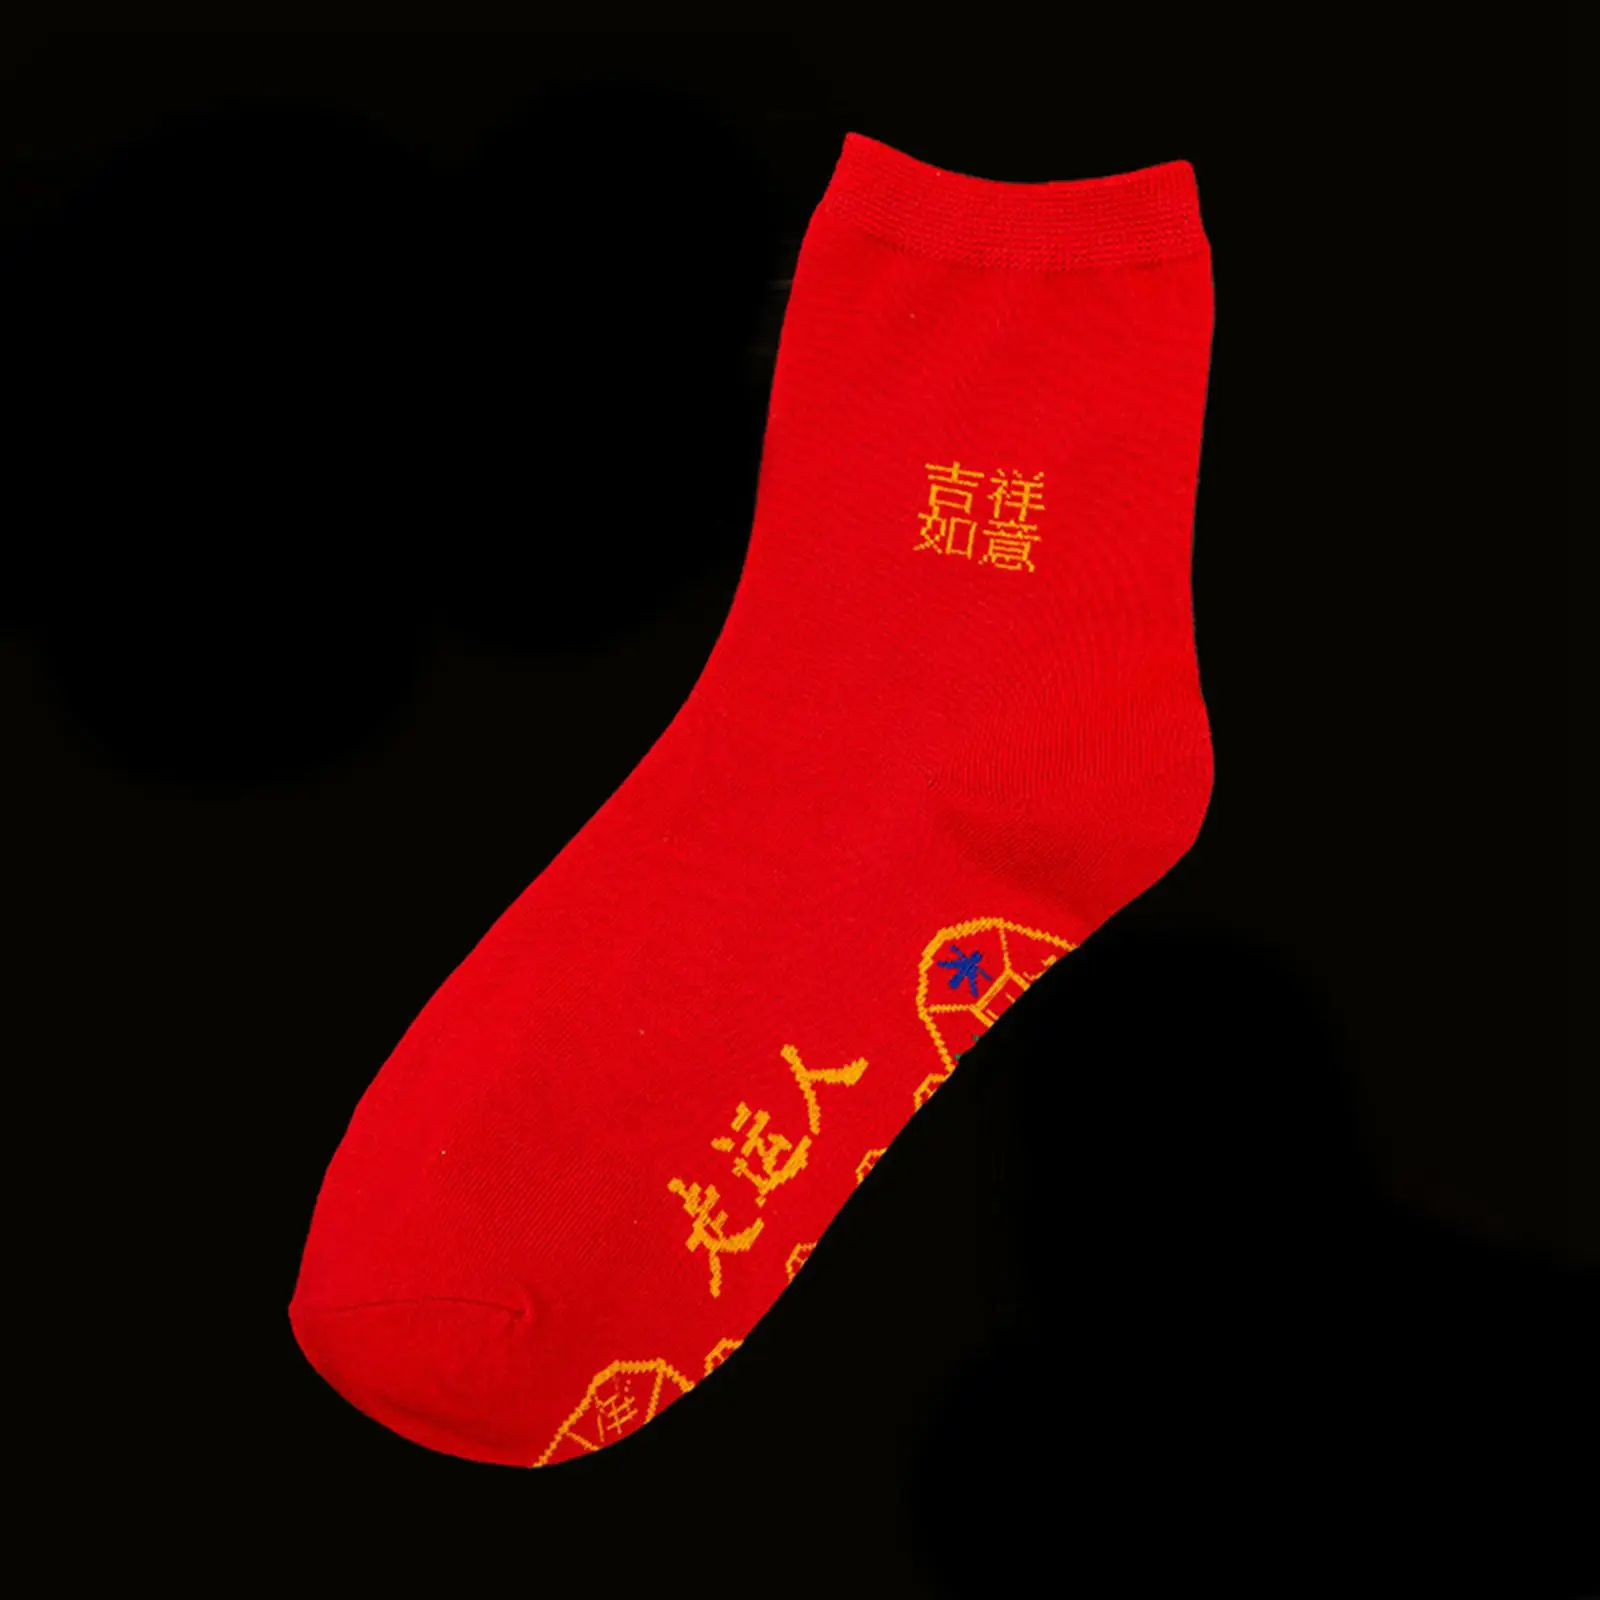 New Year Red Cotton Socks Funny with Chinese Cultural Characteristics Breathable Supplies for Adults Teens Spring Festival Socks